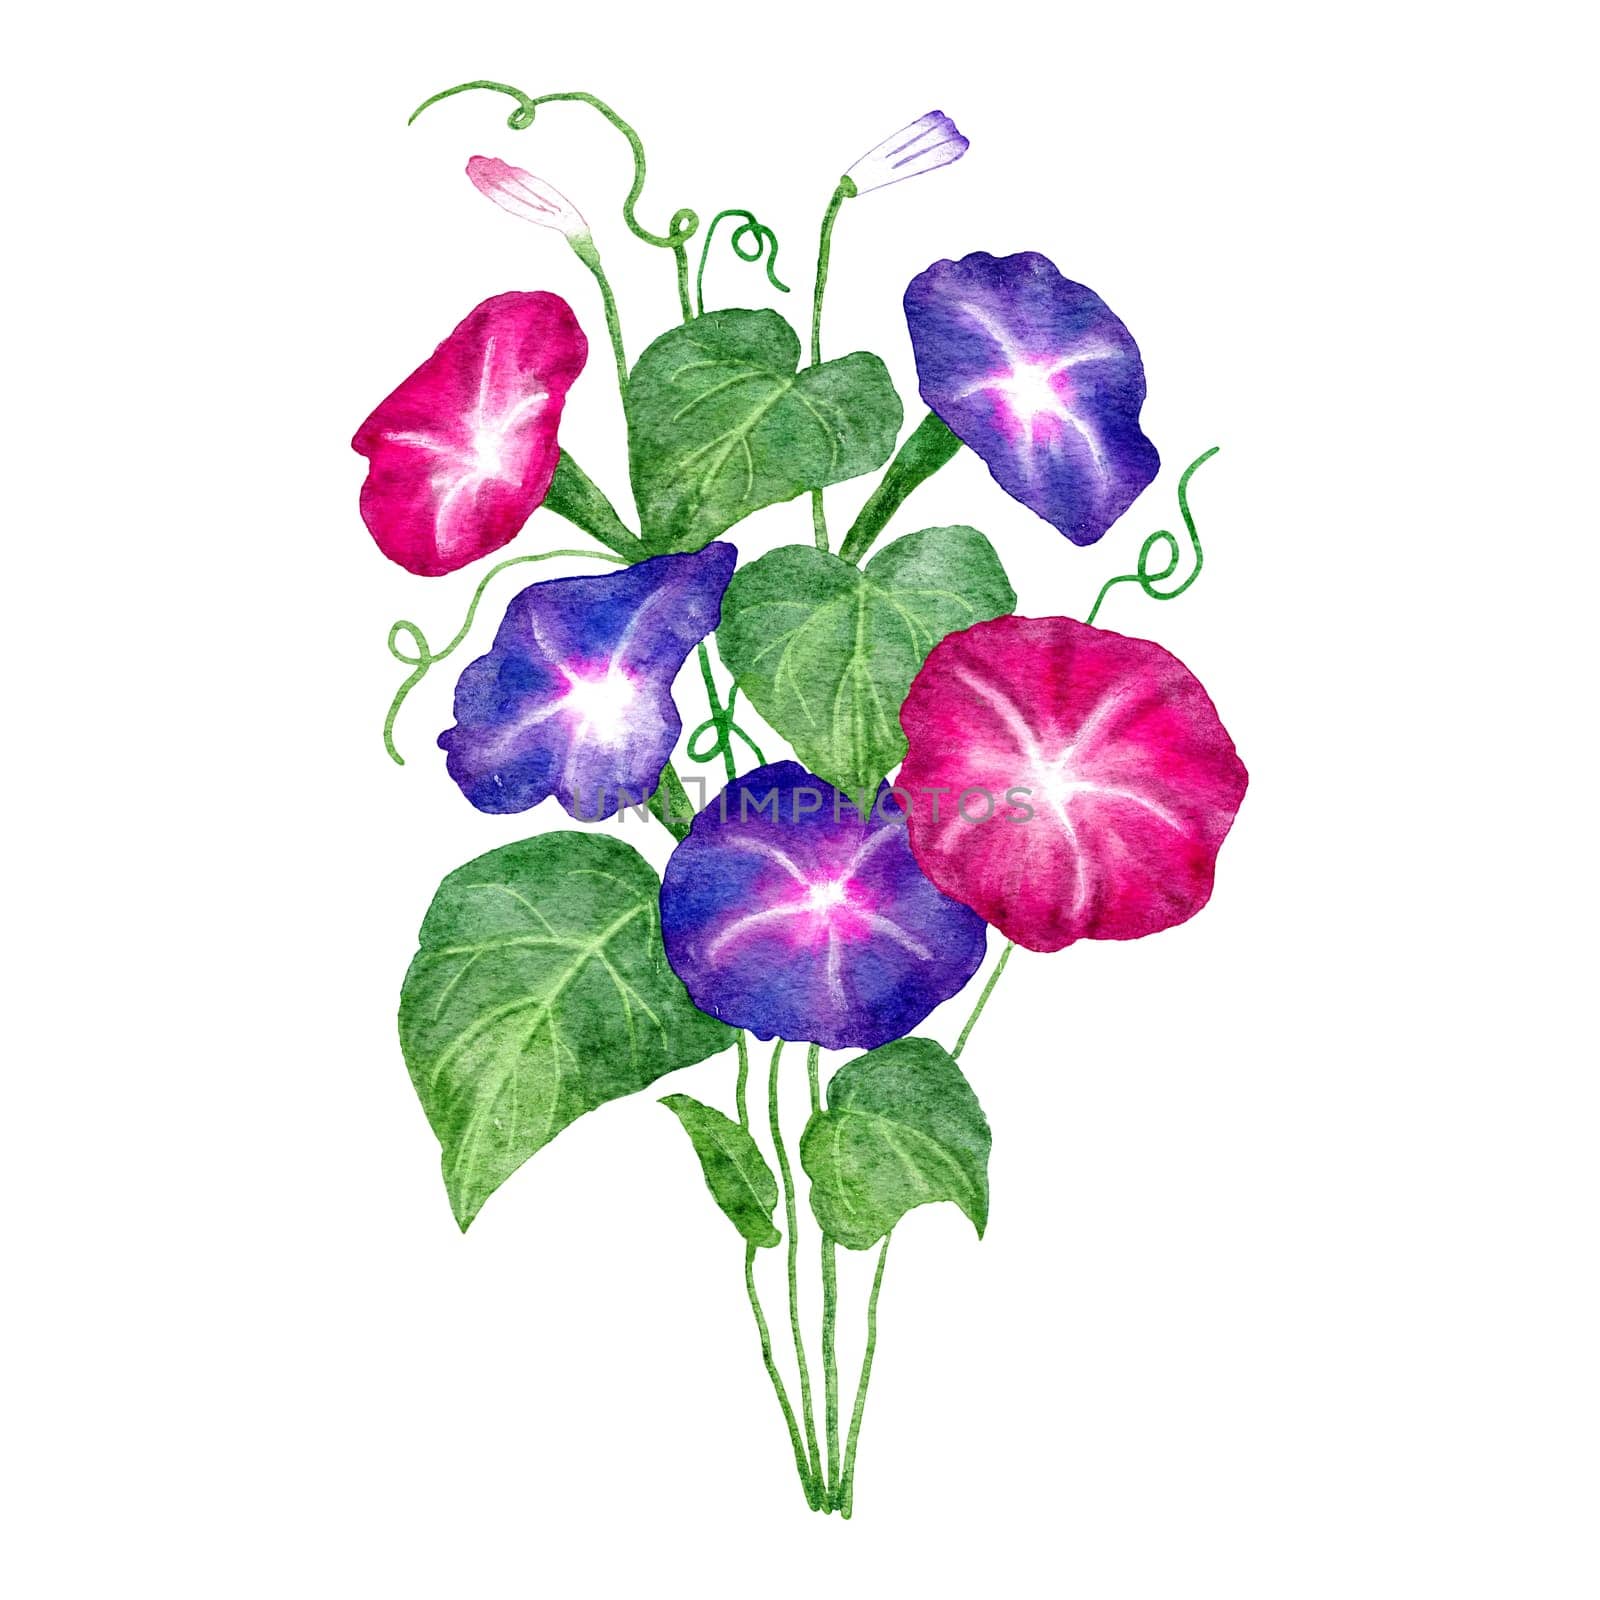 Hand drawn watercolor illustration of morning glory flower, Ipomoea floral in pink purple, green leaves. Garden bloom blossom botanical nature design, japanese style plant, ivy drawing gardening